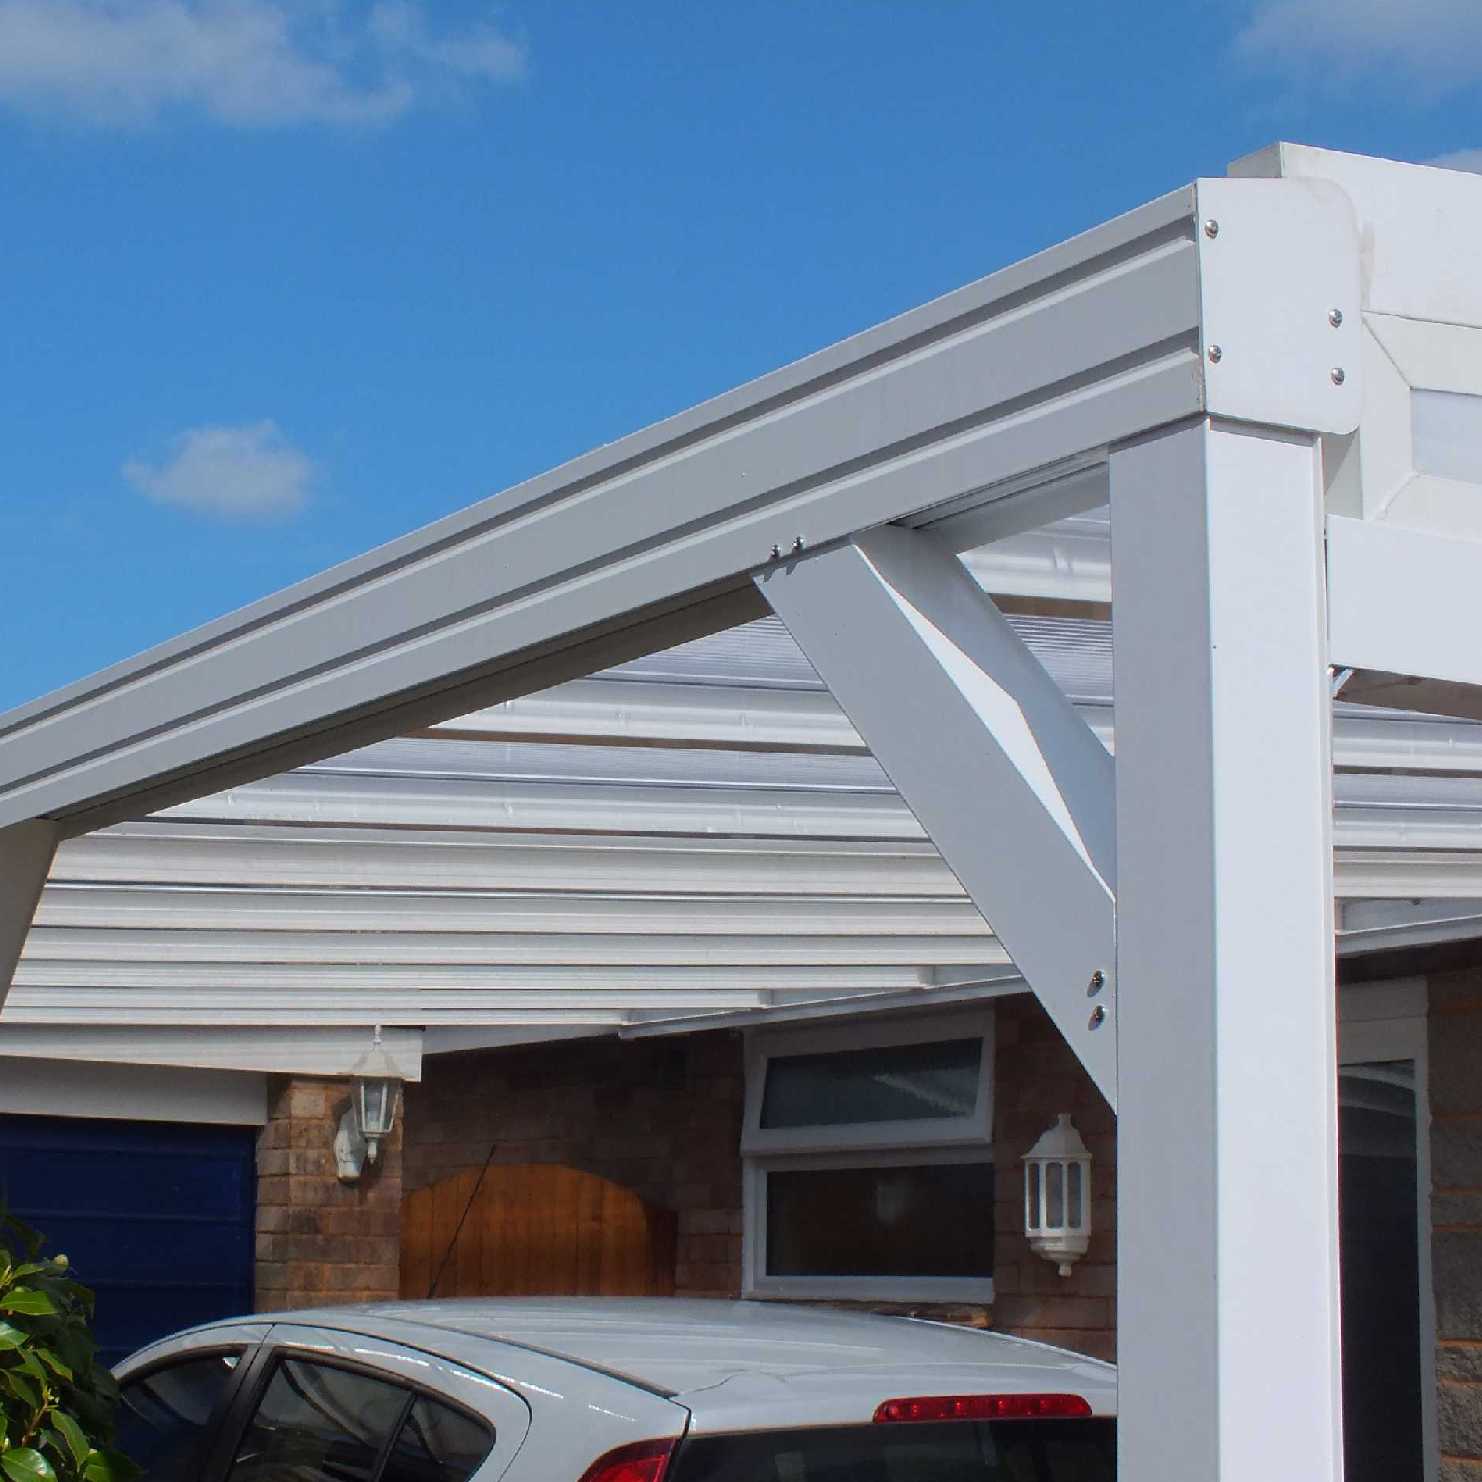 Buy Omega Smart Lean-To Canopy, White with 16mm Polycarbonate Glazing - 8.4m (W) x 2.5m (P), (4) Supporting Posts online today